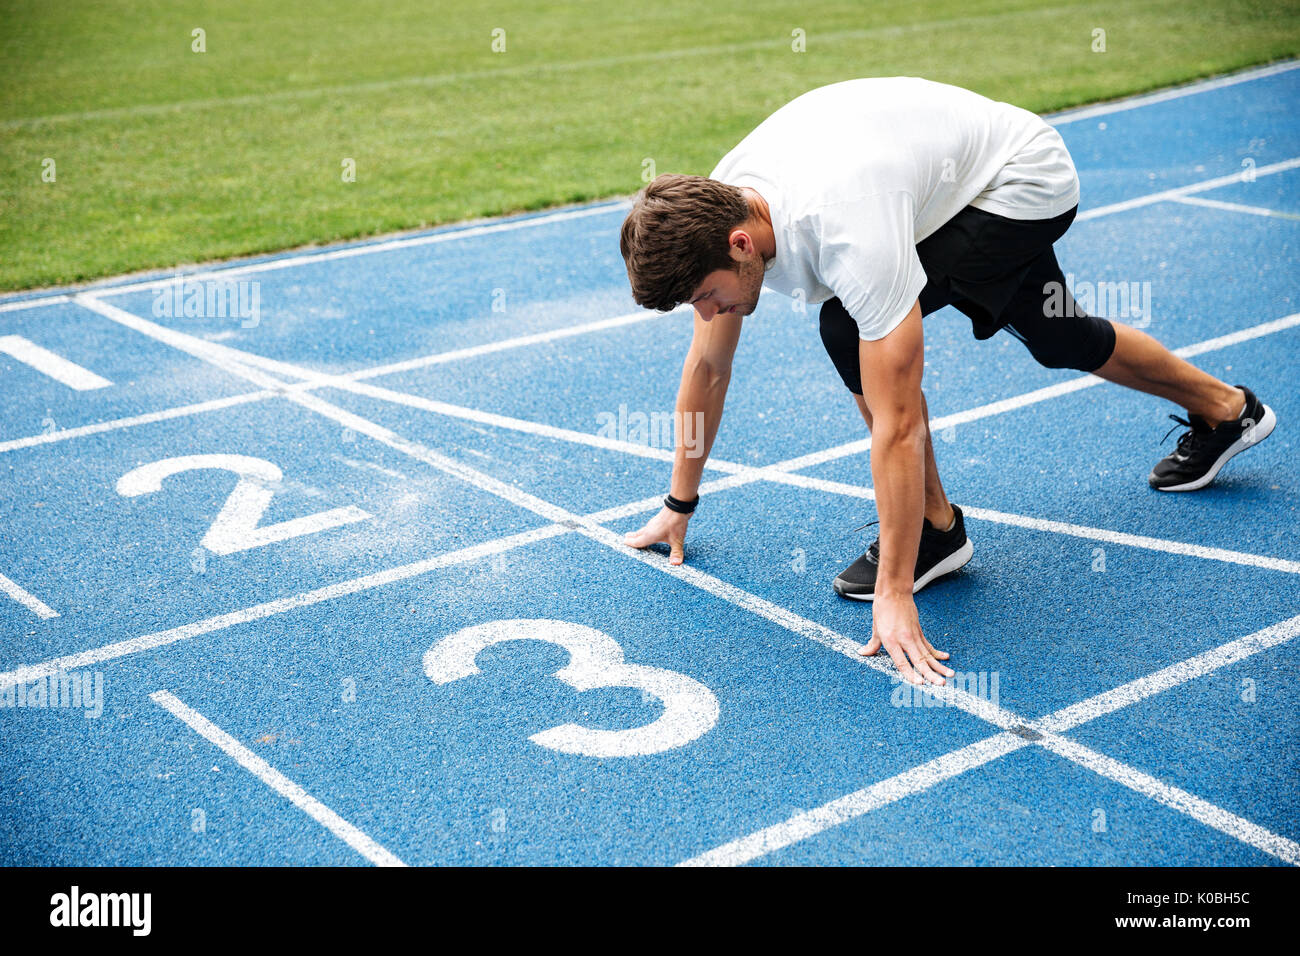 Male Athlete On Starting Position At Athletics Running Track Stock Photo -  Download Image Now - iStock